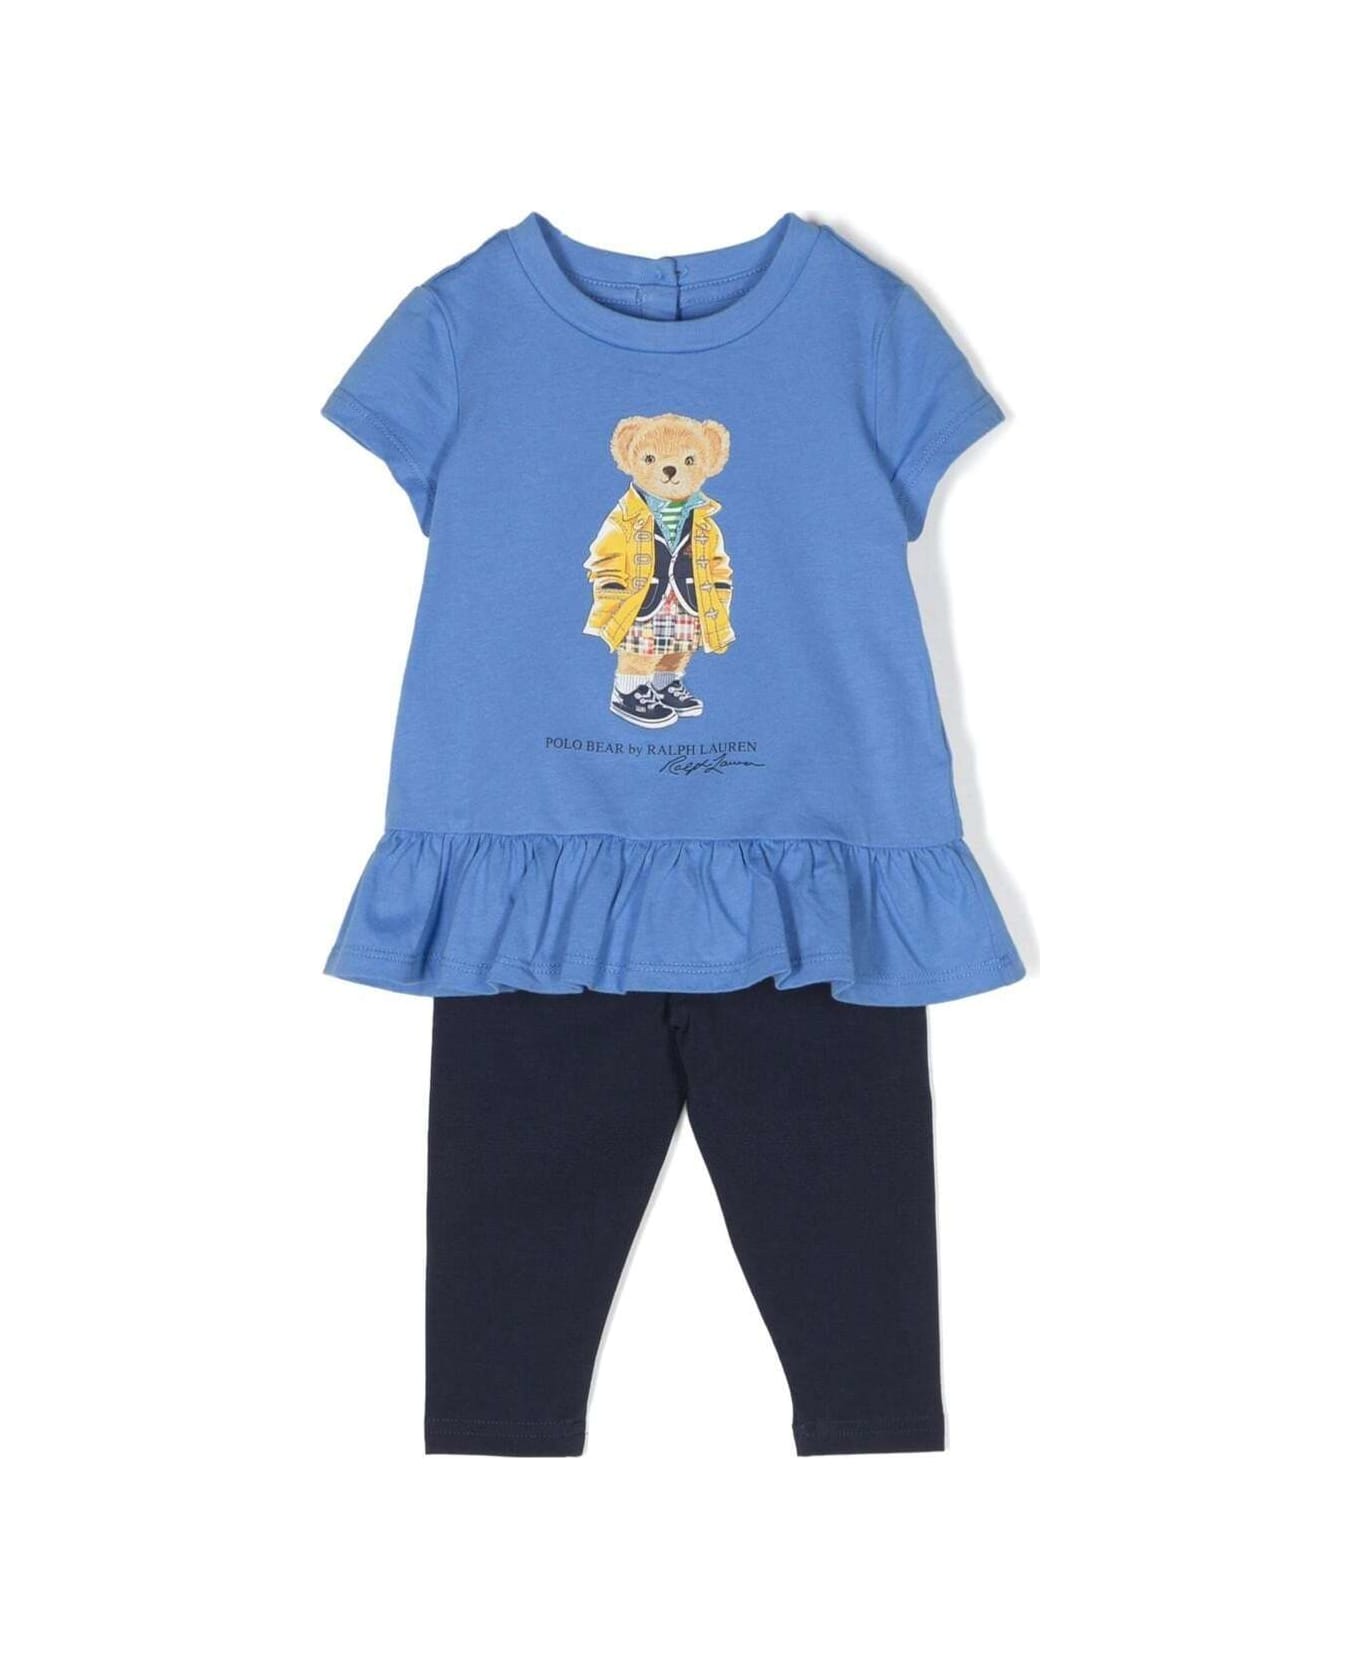 Polo las Ralph Lauren Blue And Black Set With Top And Leggings With Teddy Bear Print In Cotton Baby - Blu